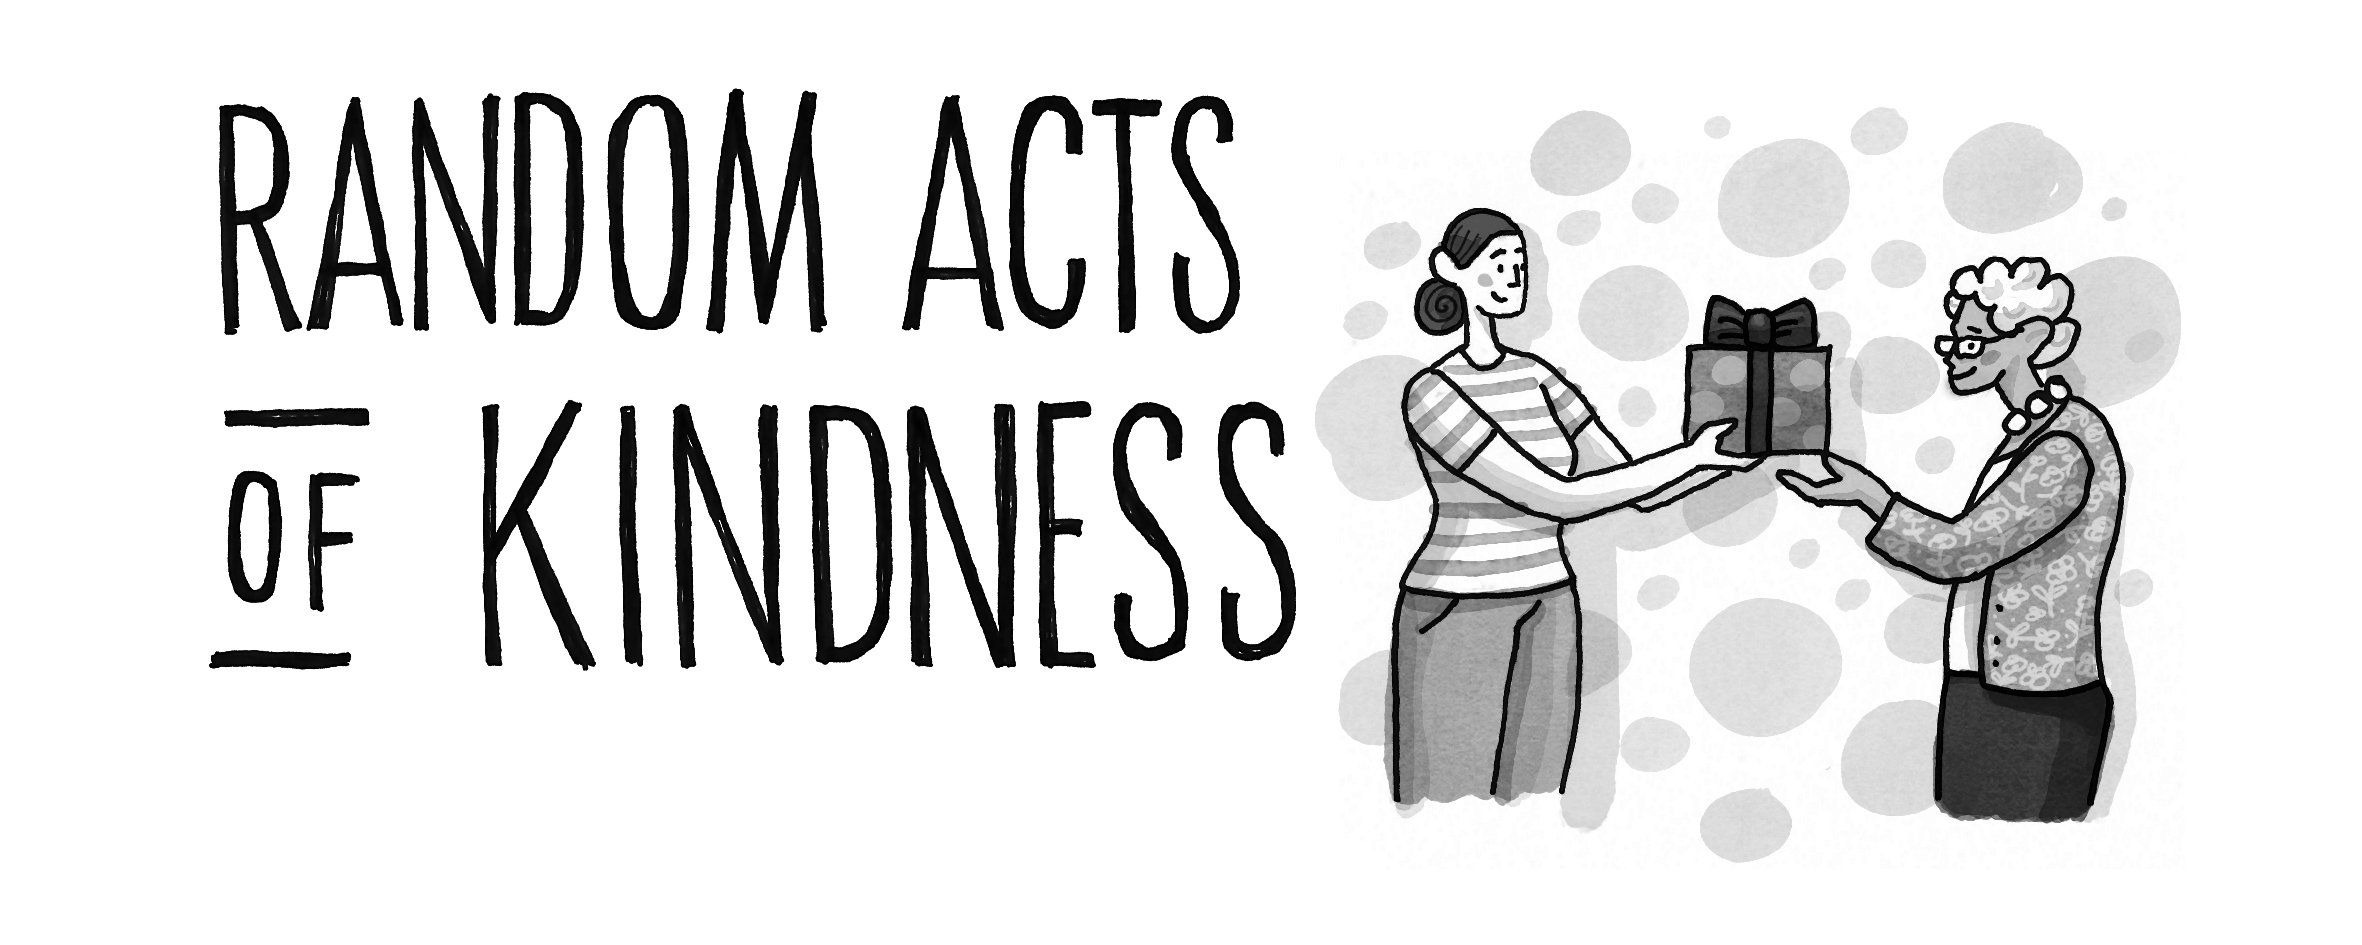 claire-turnbull-planner-illustration-random-acts-kindness-by-creative-people